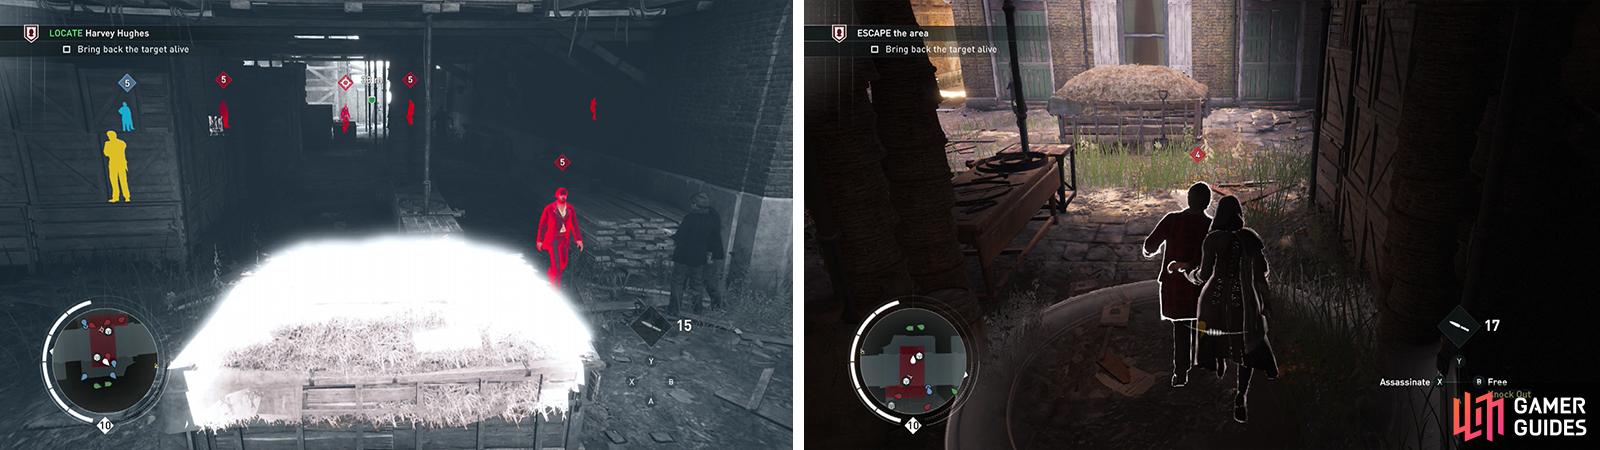 Use the haystack to kill the patroller (left). Hop out, grab the target and escort him from the area (right).